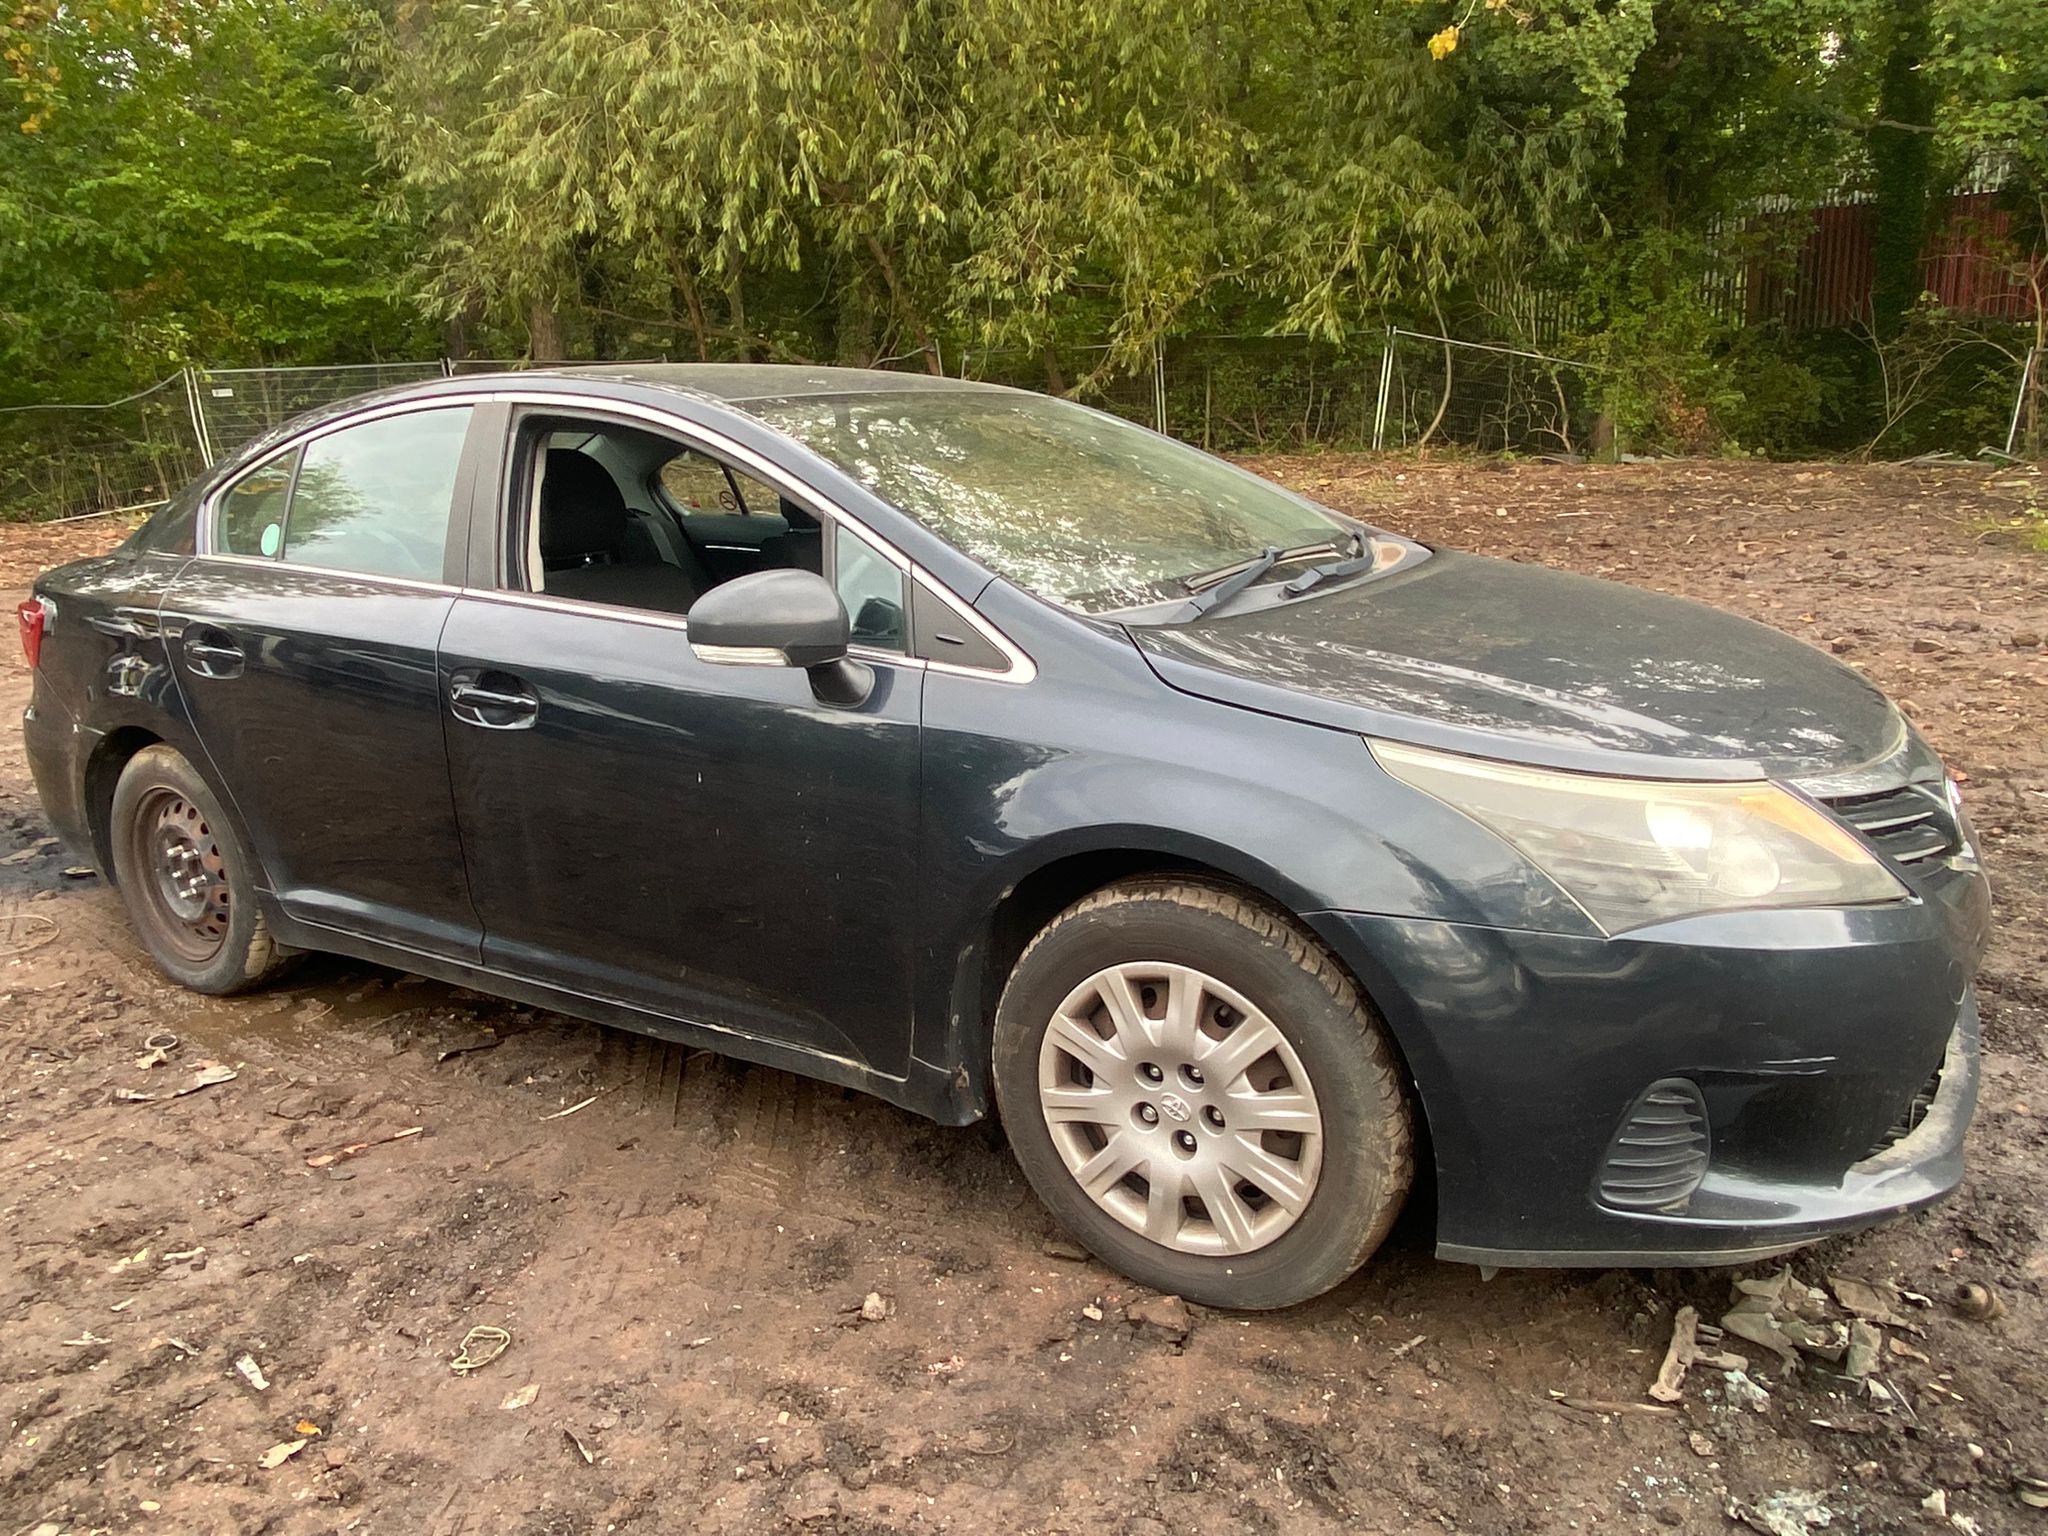 REF 348  TOYOTA AVENSIS SALOON 2.0D4D 6 SPEED MANUAL 2012